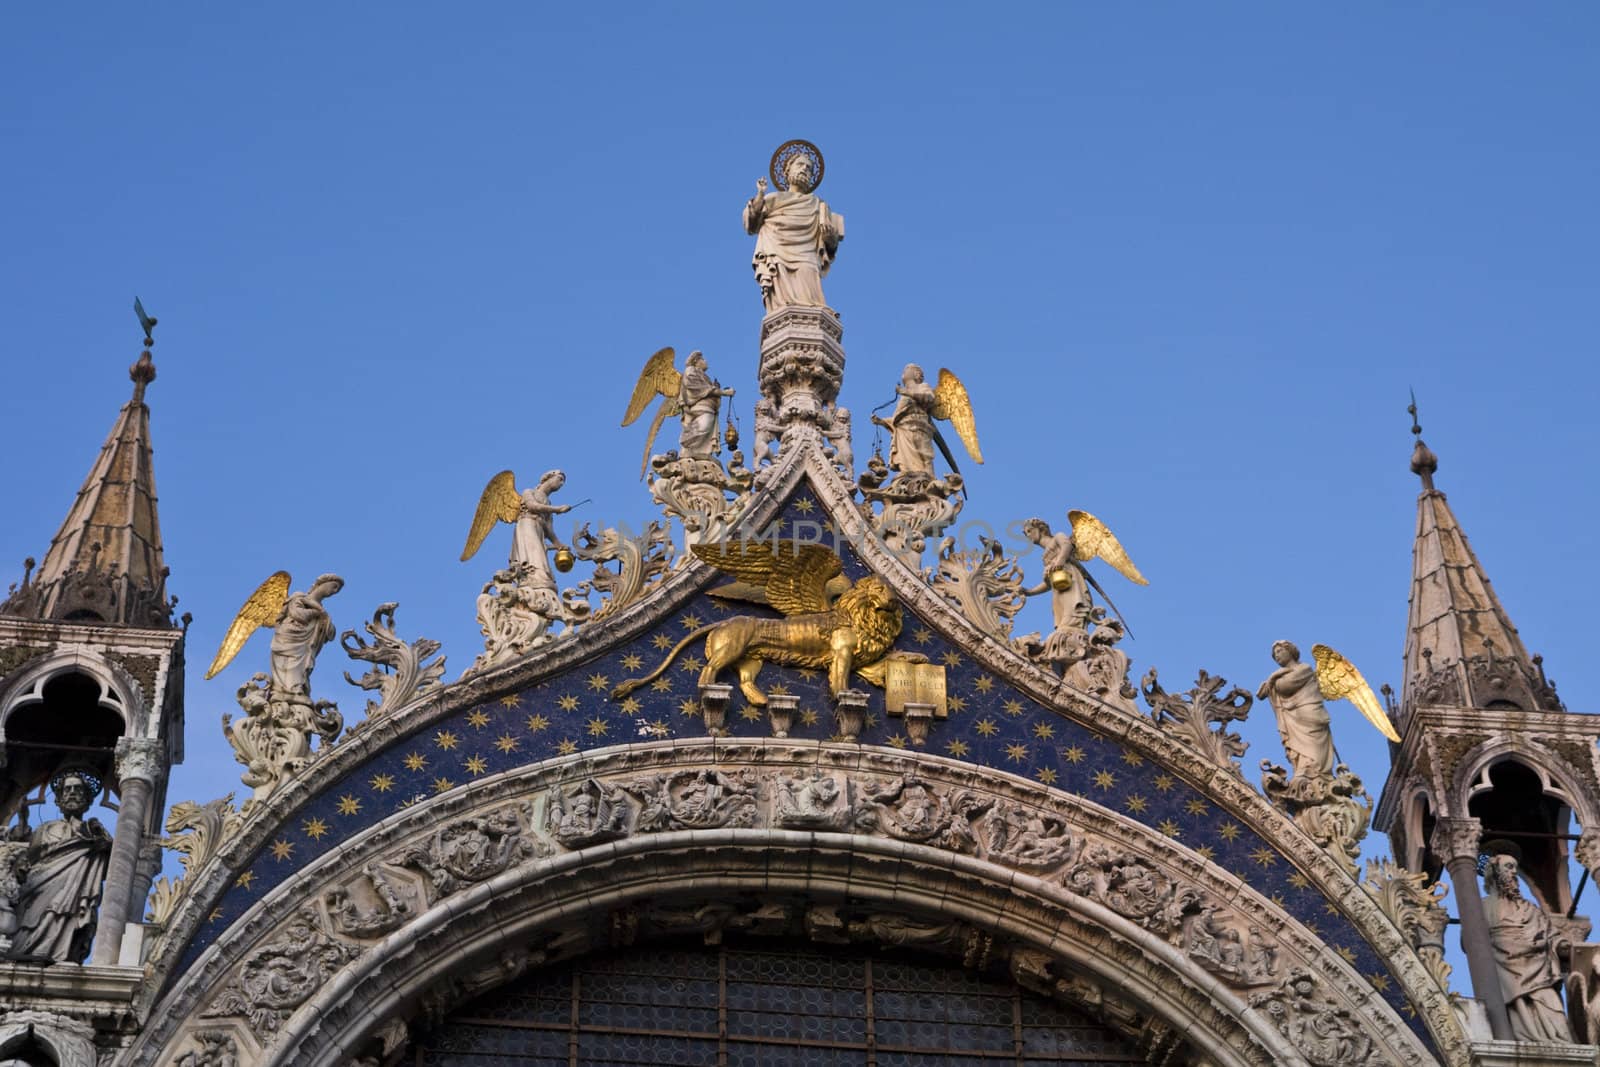 Ornate frontage of St Marks basilica in Venice Italy